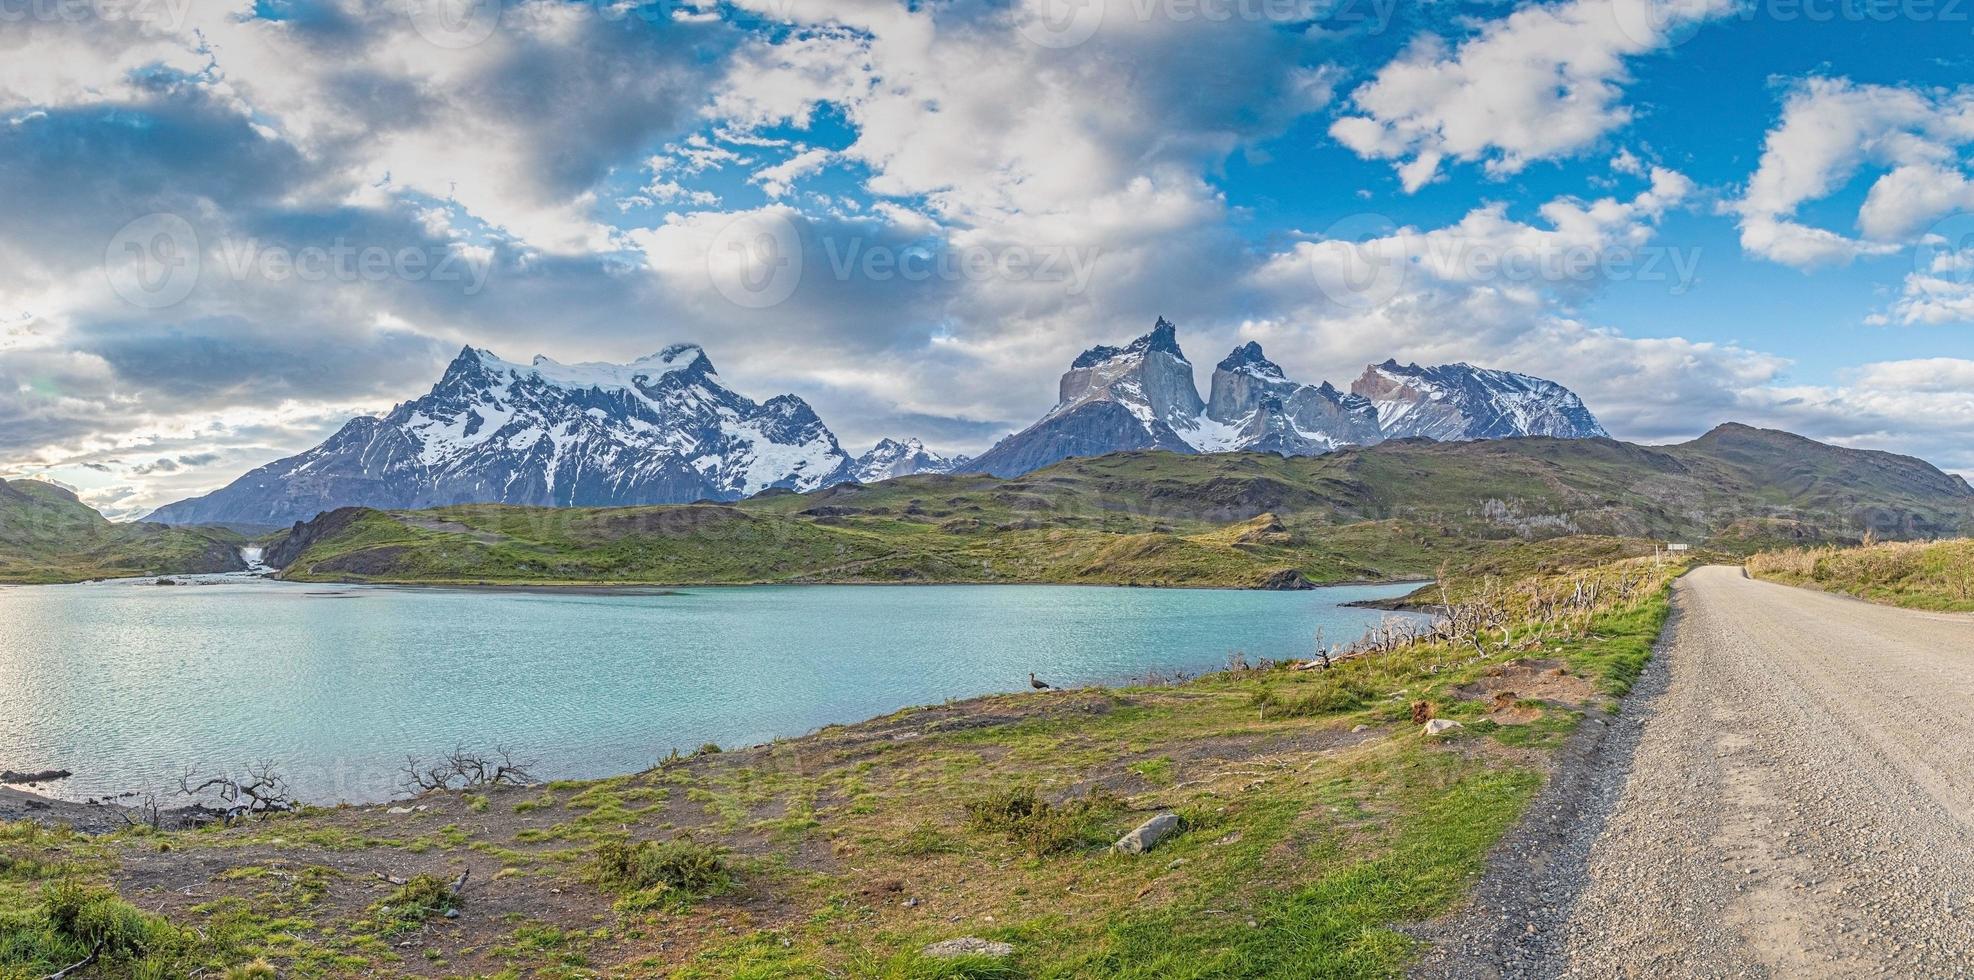 Panoramic image of the mountain massif in Torres del Paine National Park in chilean part of Patagonia photo